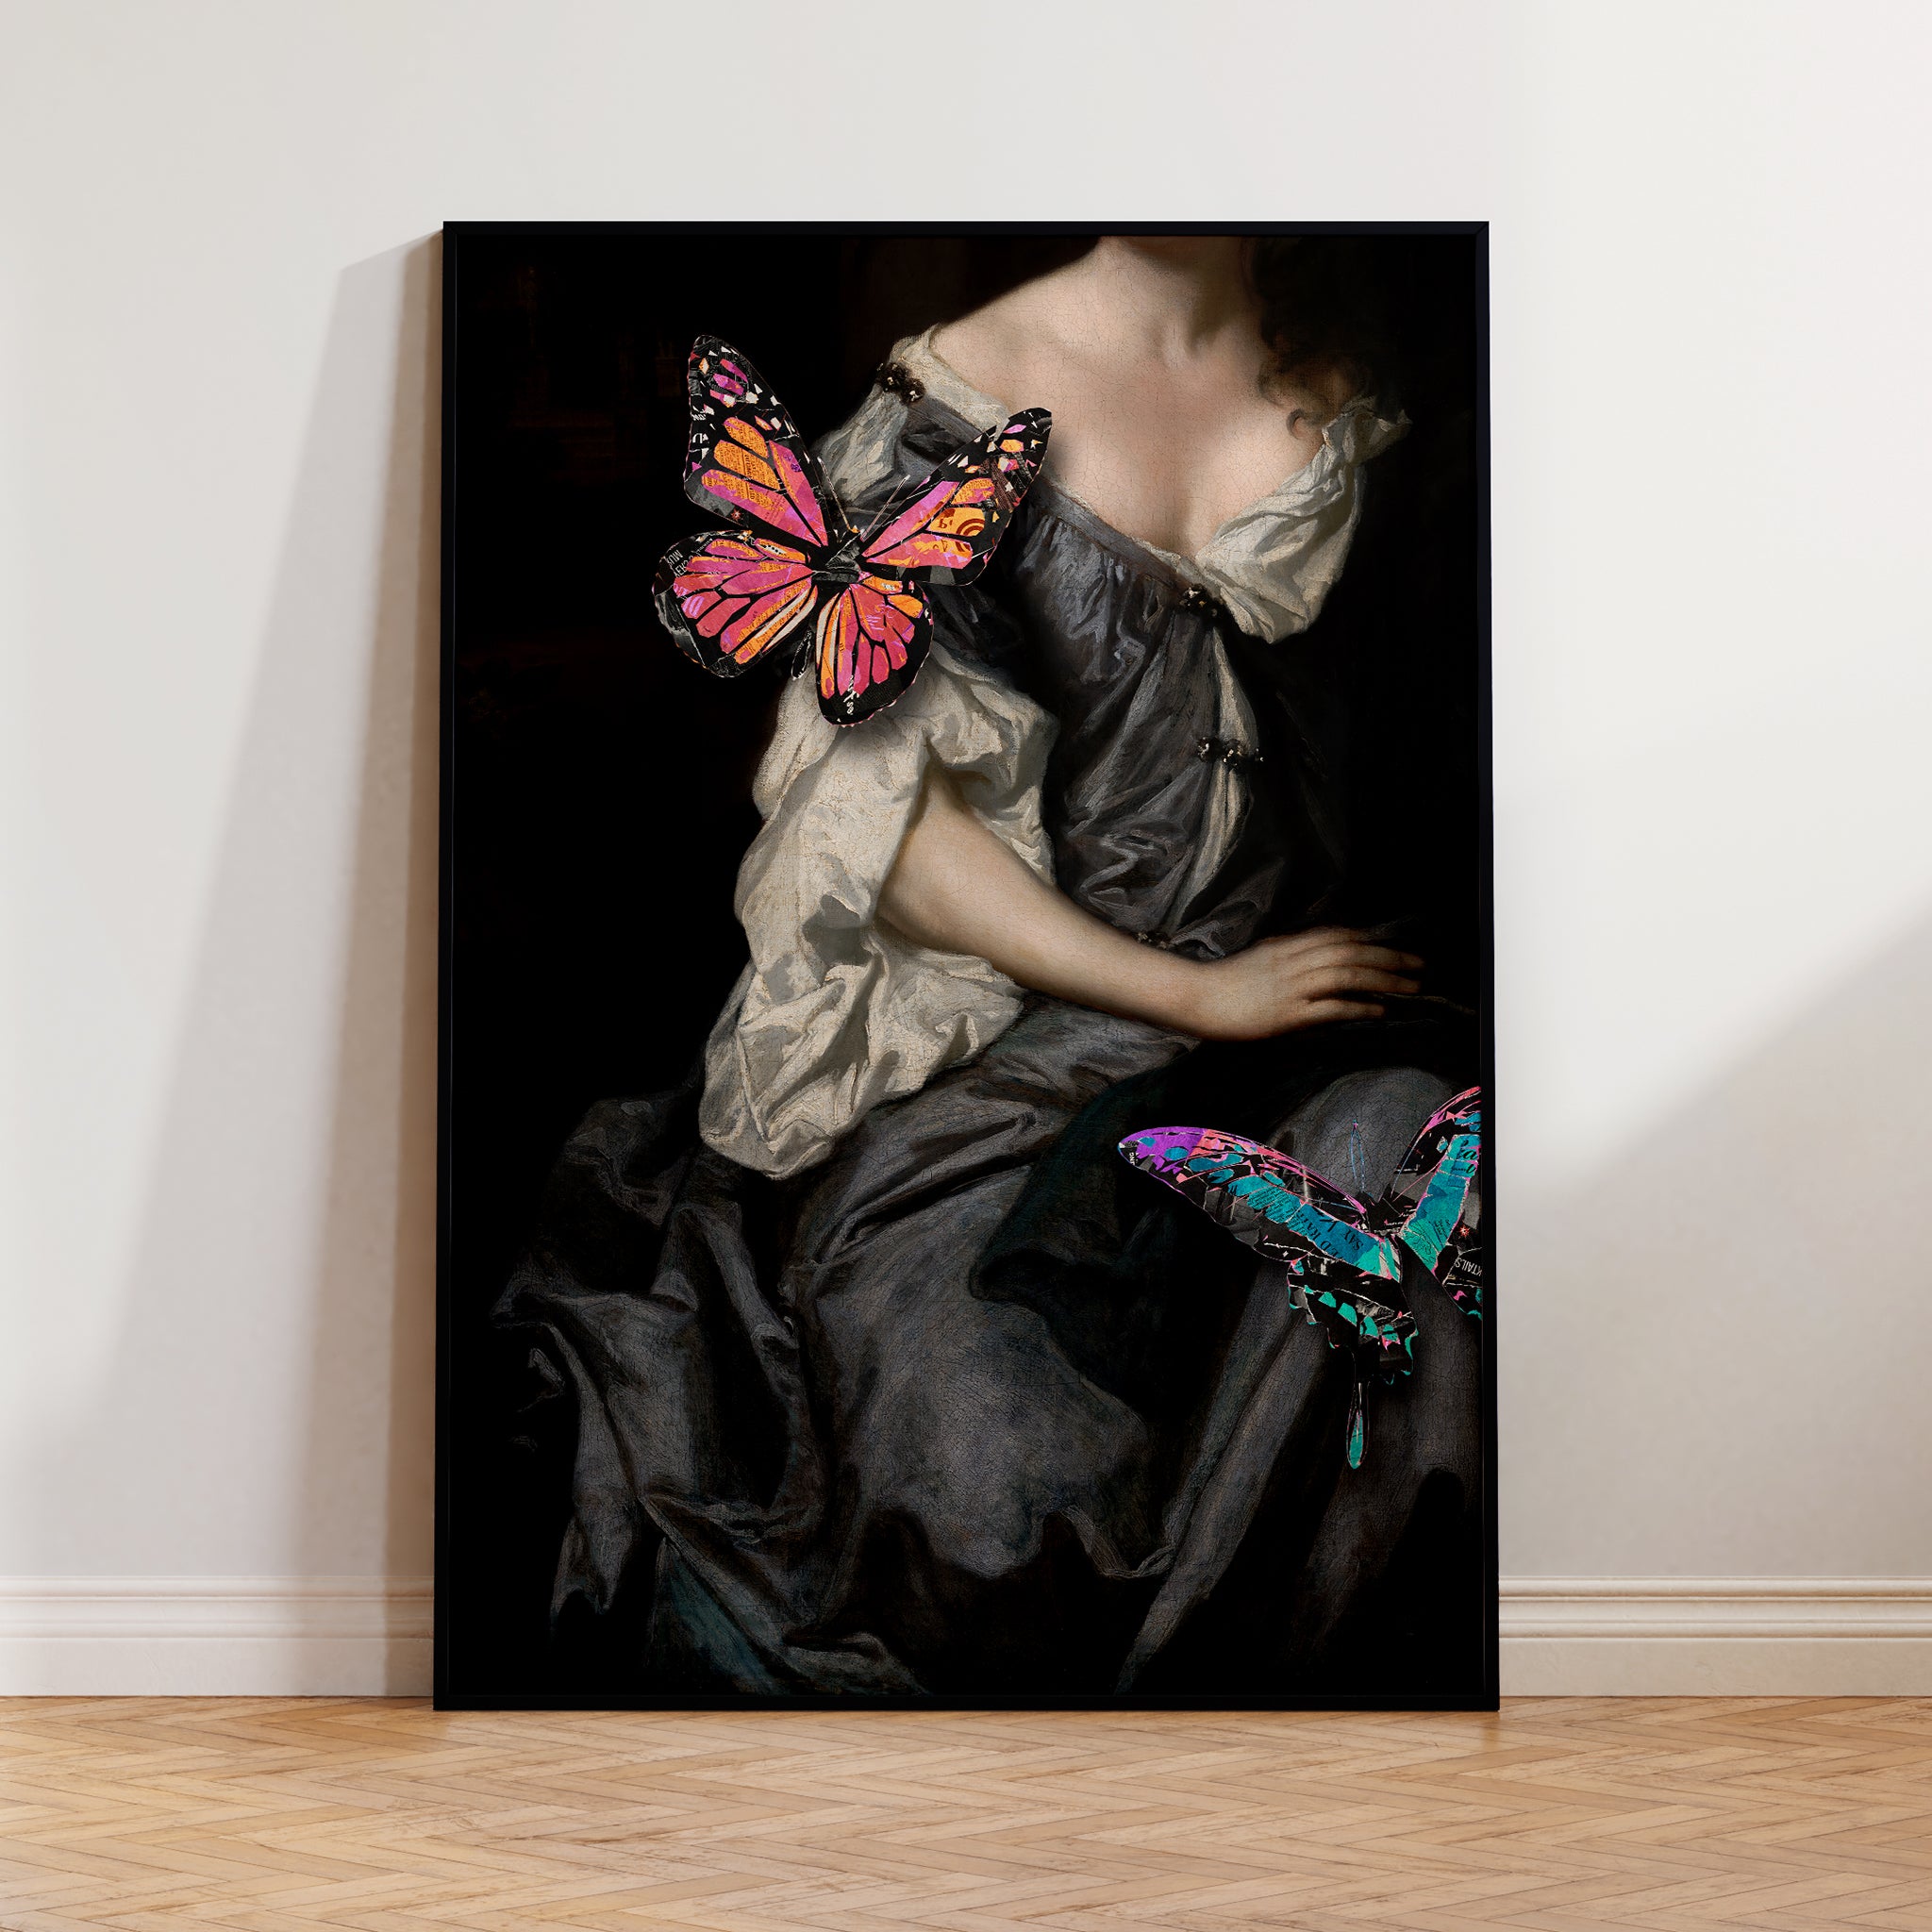 Be inspired by our Victorian portrait with gray dress and butterflies art print. This artwork was printed using the giclée process on archival acid-free paper and is presented in a modern black frame that captures its timeless beauty in every detail.